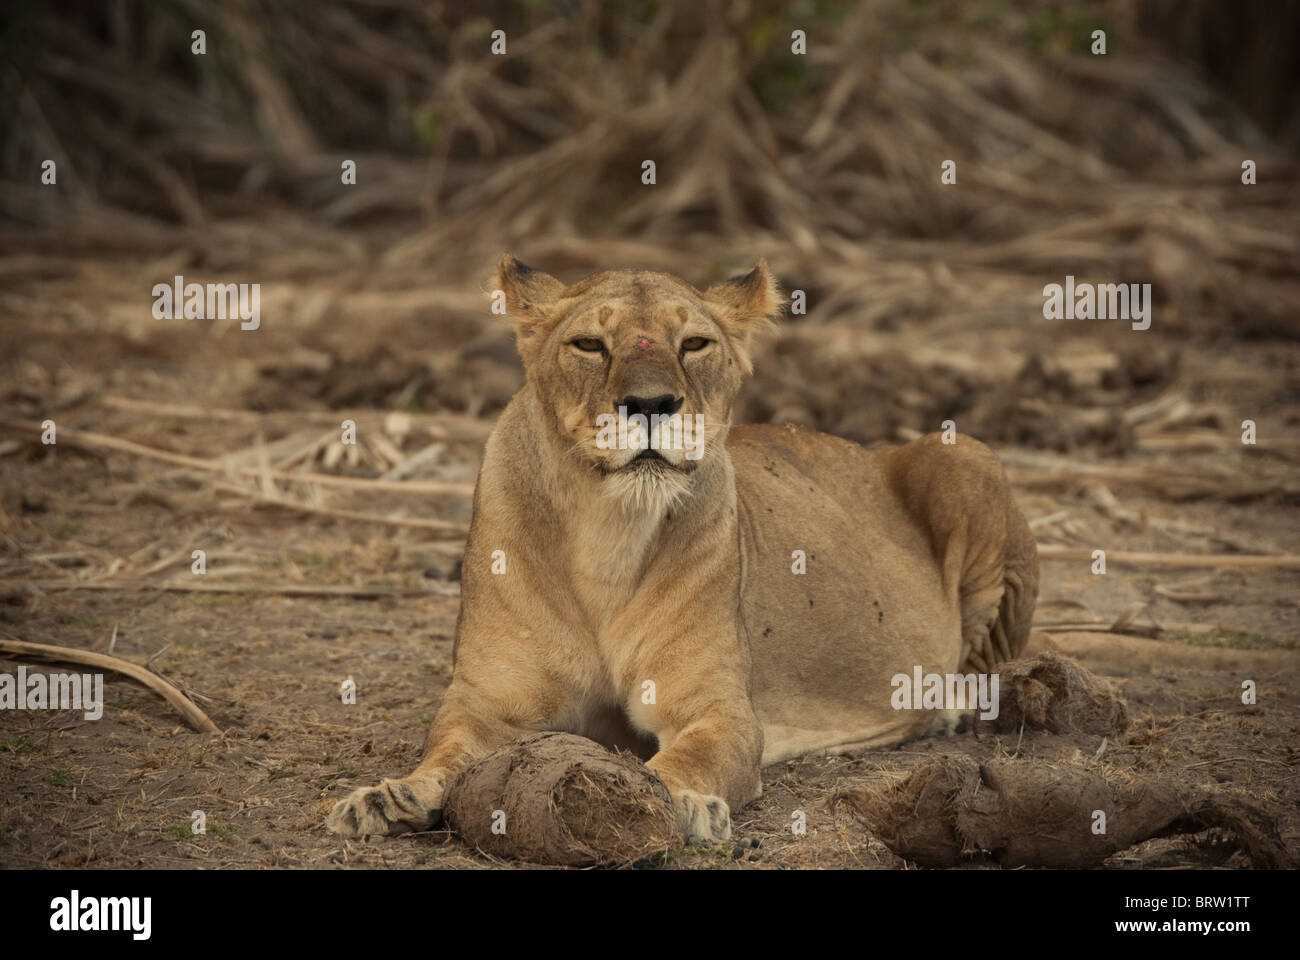 Lioness with a coconut or similar between her paws whilst lying down and looking into the camera, Amboseli in Kenya Stock Photo